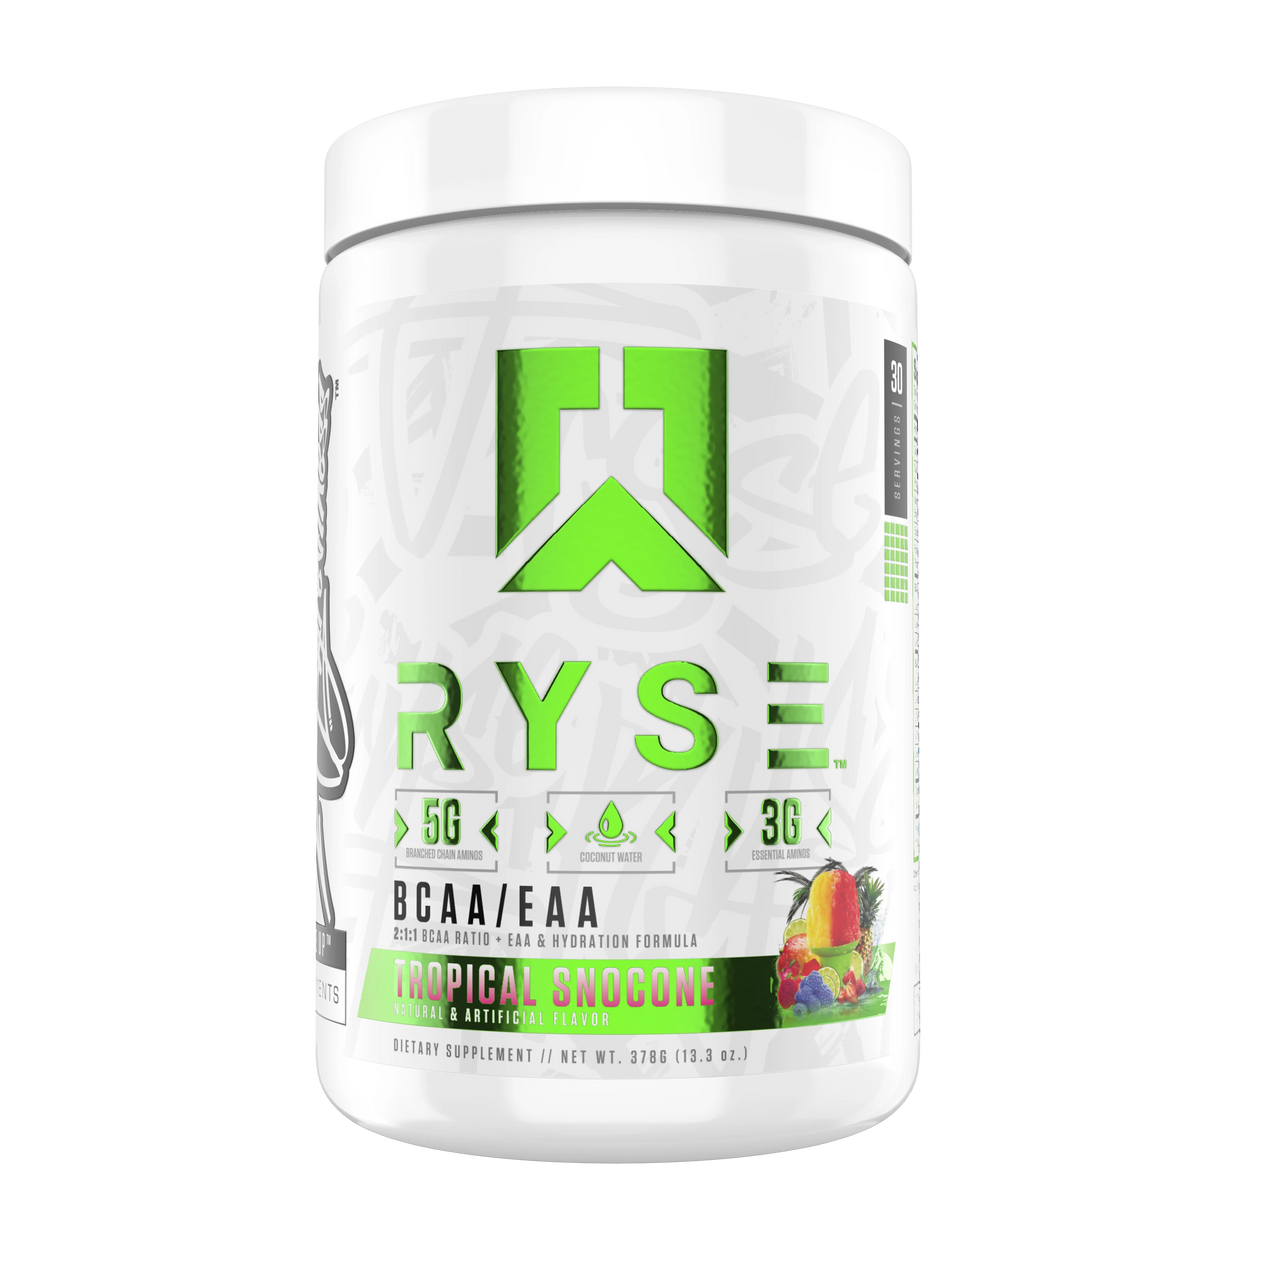 RYSE Tropical Snocone Flavor, Blend of BCAA & EAA, Best Amino Acids, Online Supplements, My Spplements